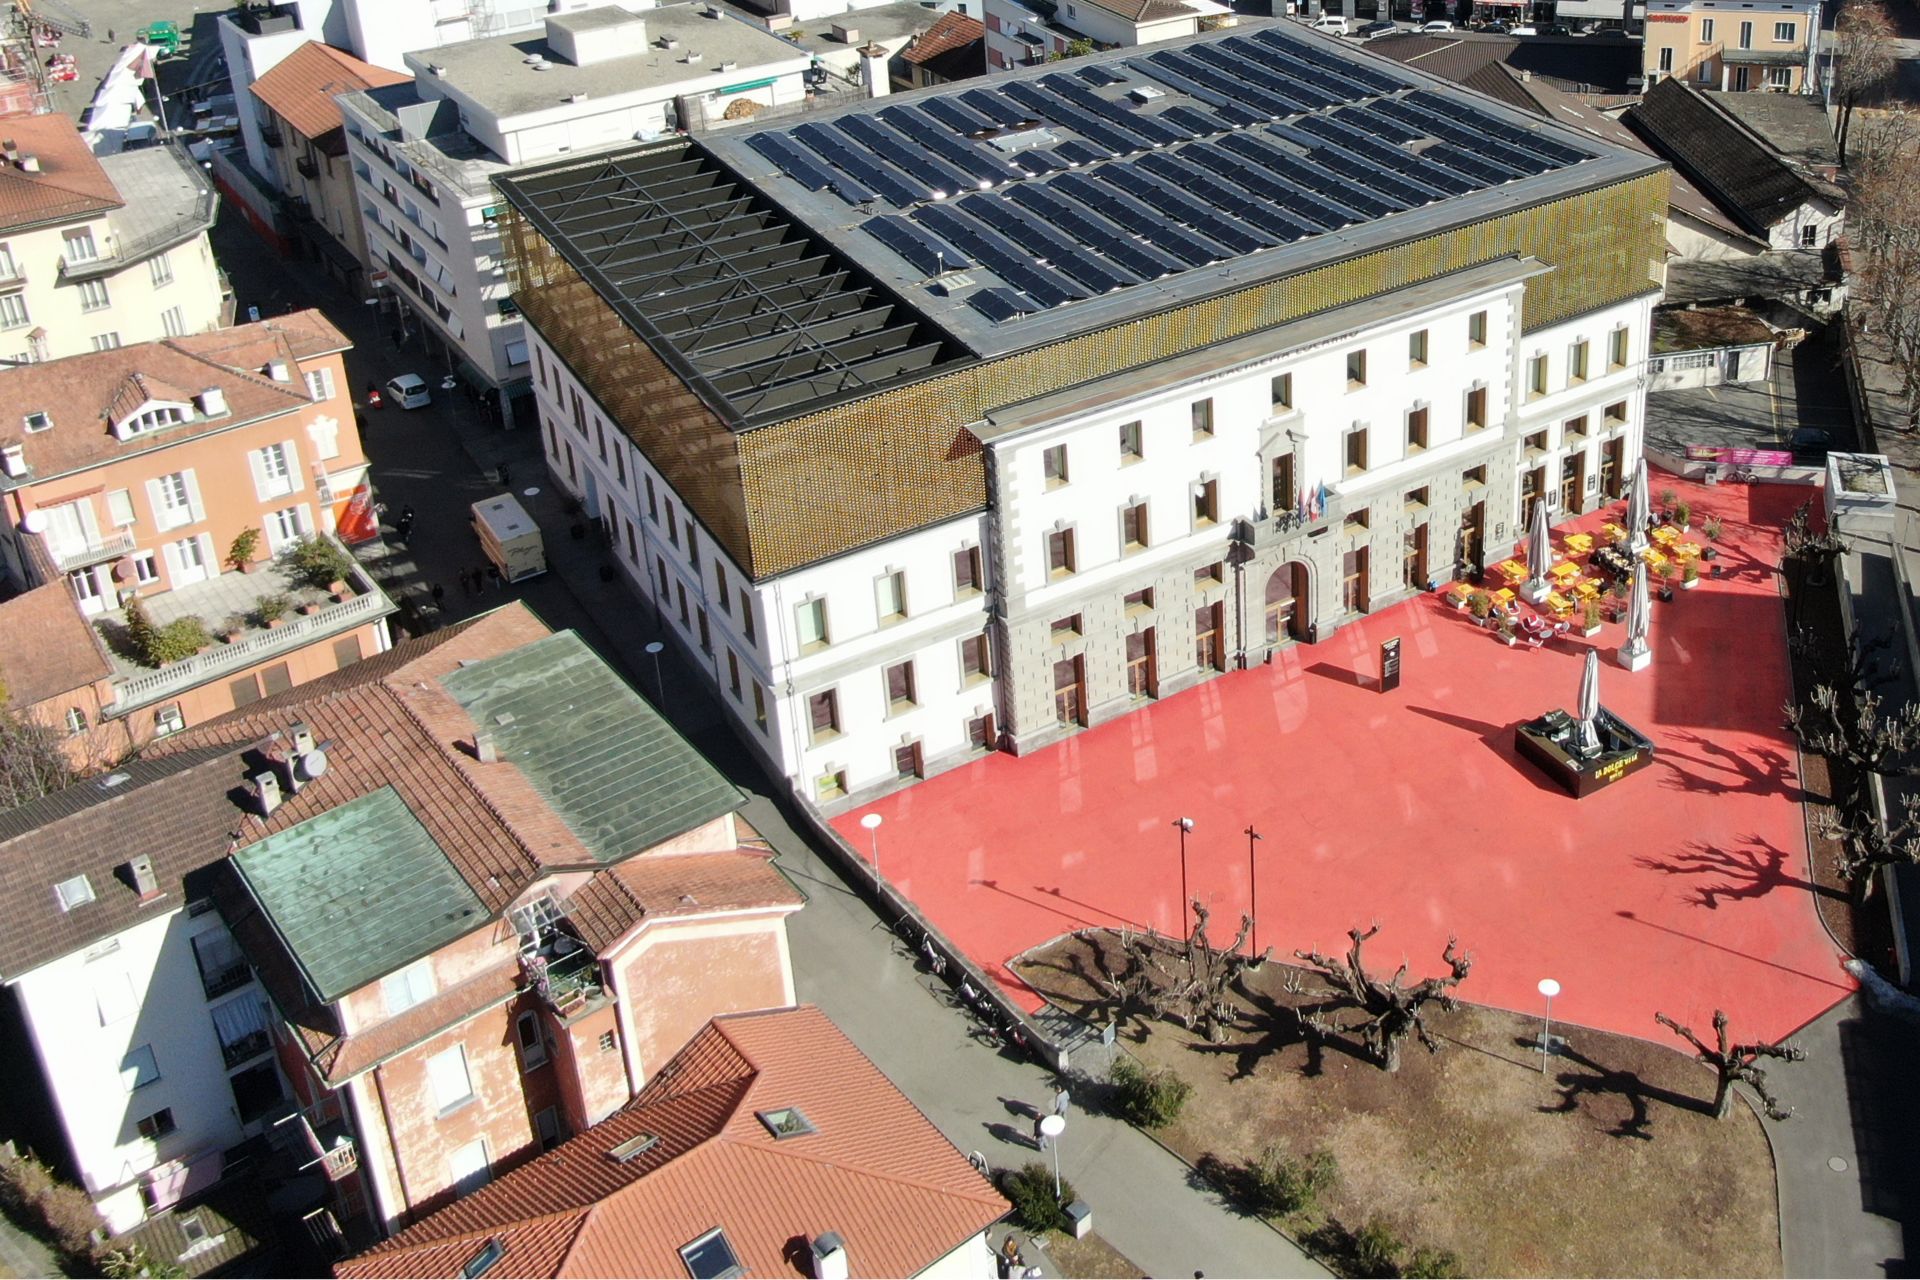 Sika SolarMount-1 on solar roof installed in east-west configuration in Locarno, Switzerland